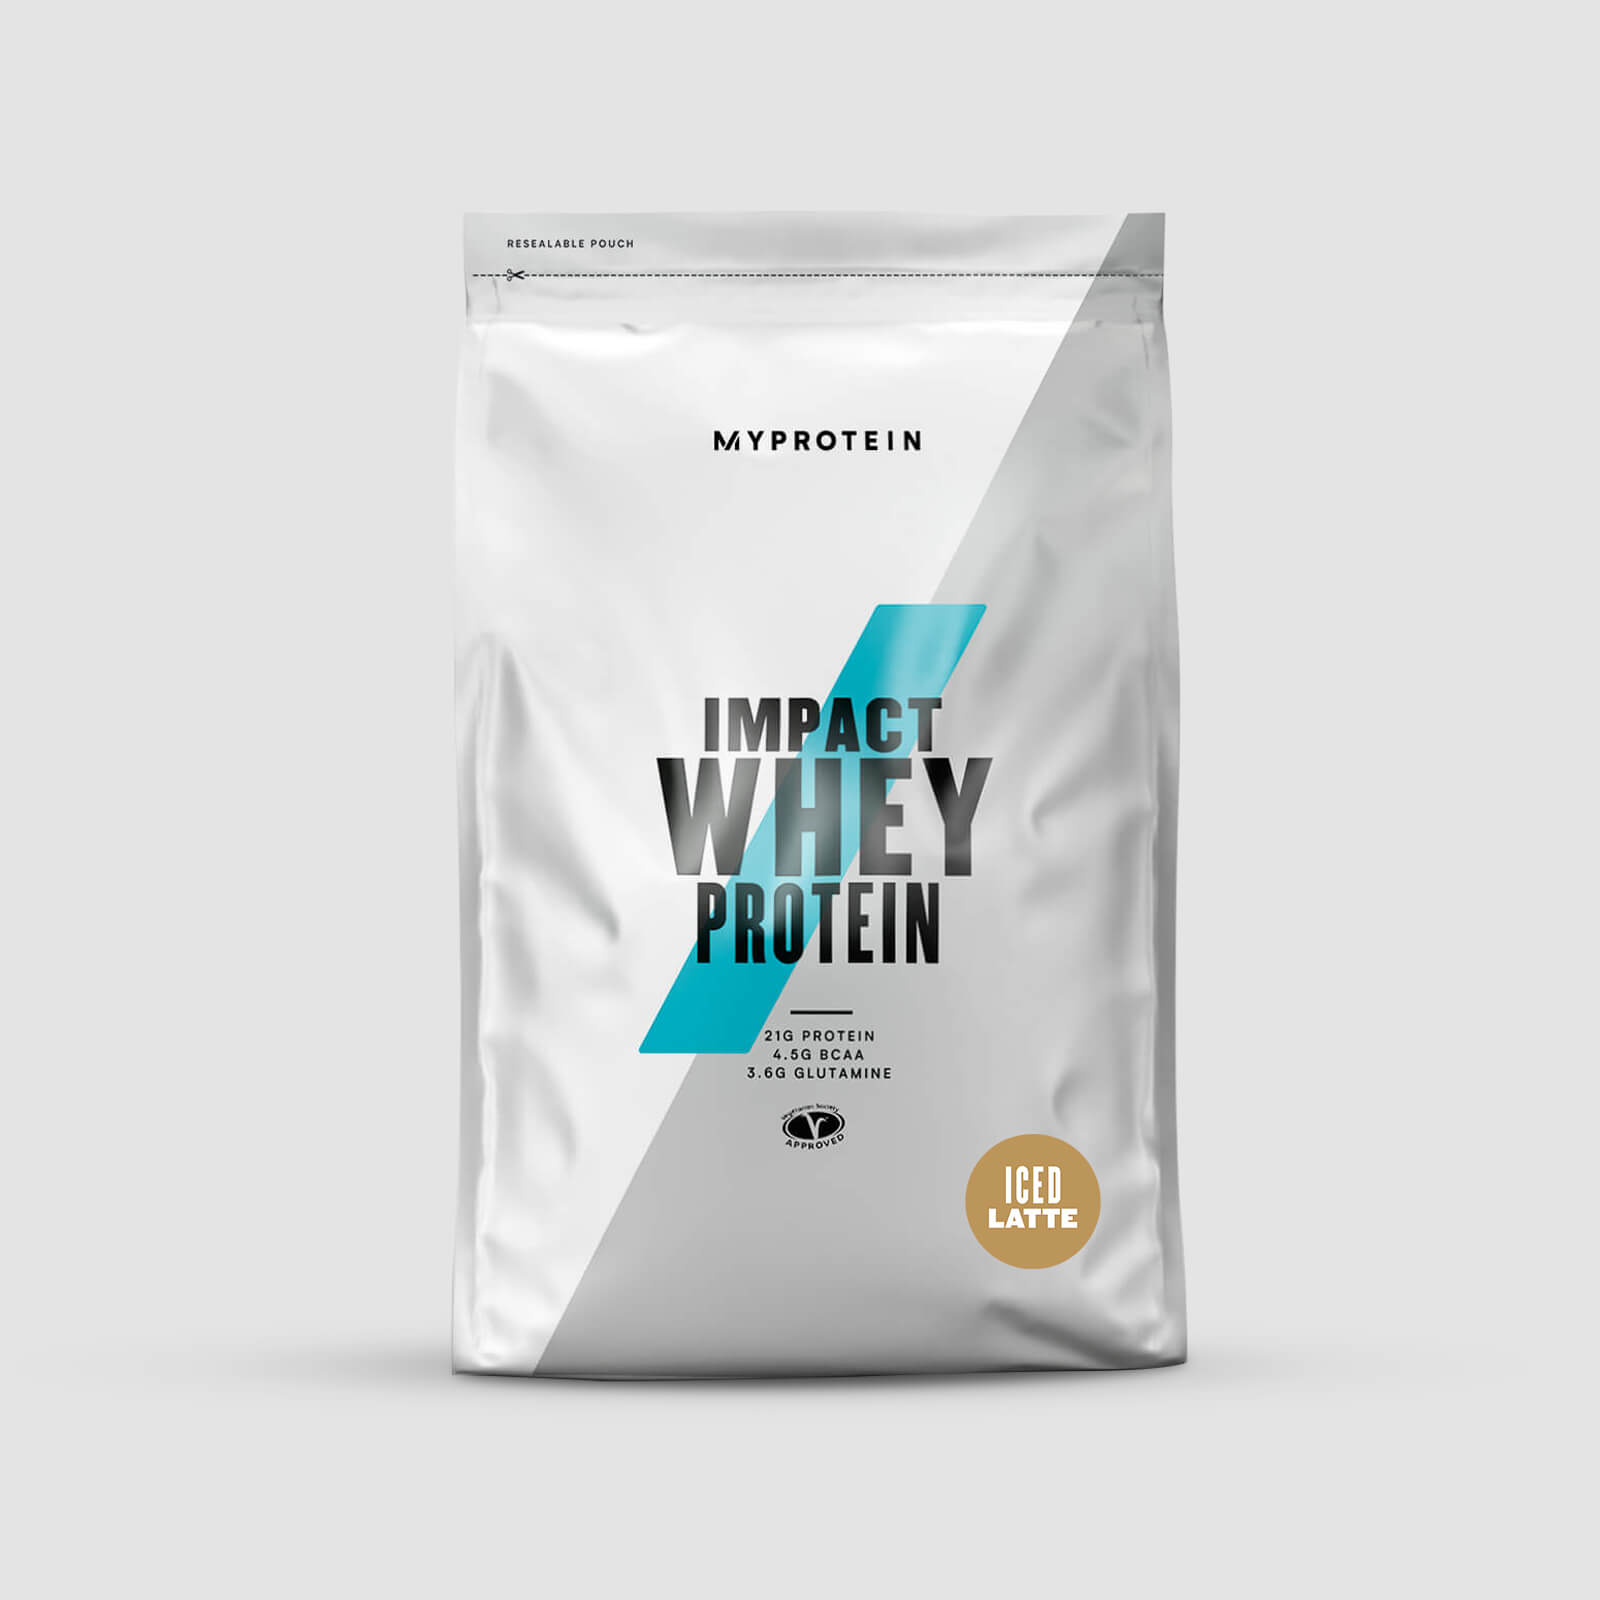 Myprotein Impact Whey Protein, Iced Latte - 1kg - Iced Latte